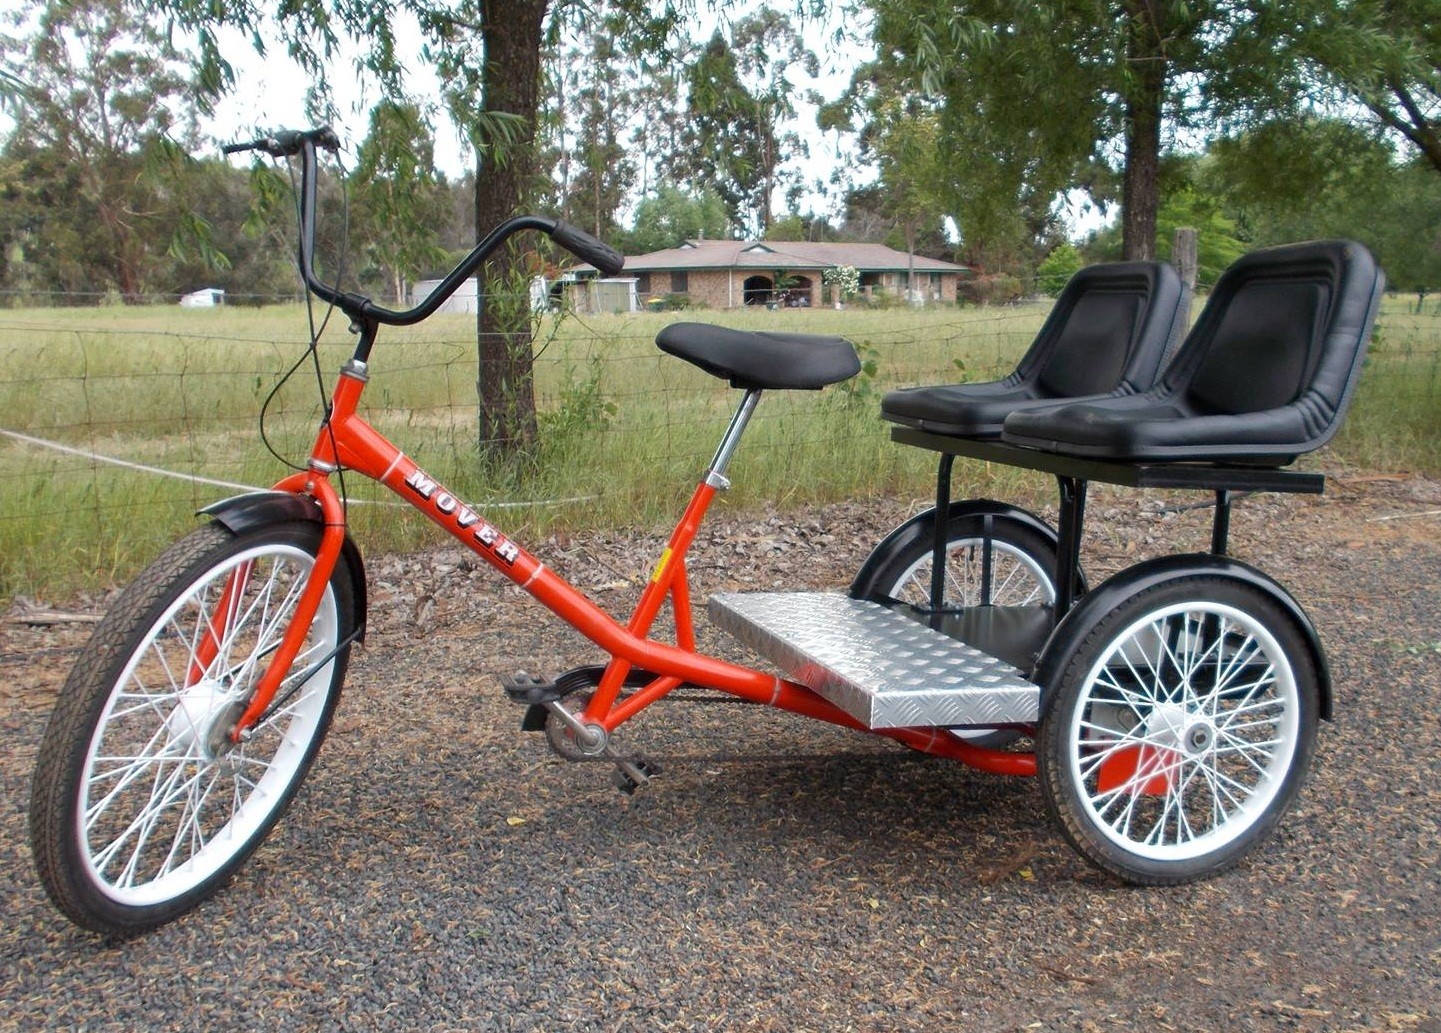 worksman mover tricycle